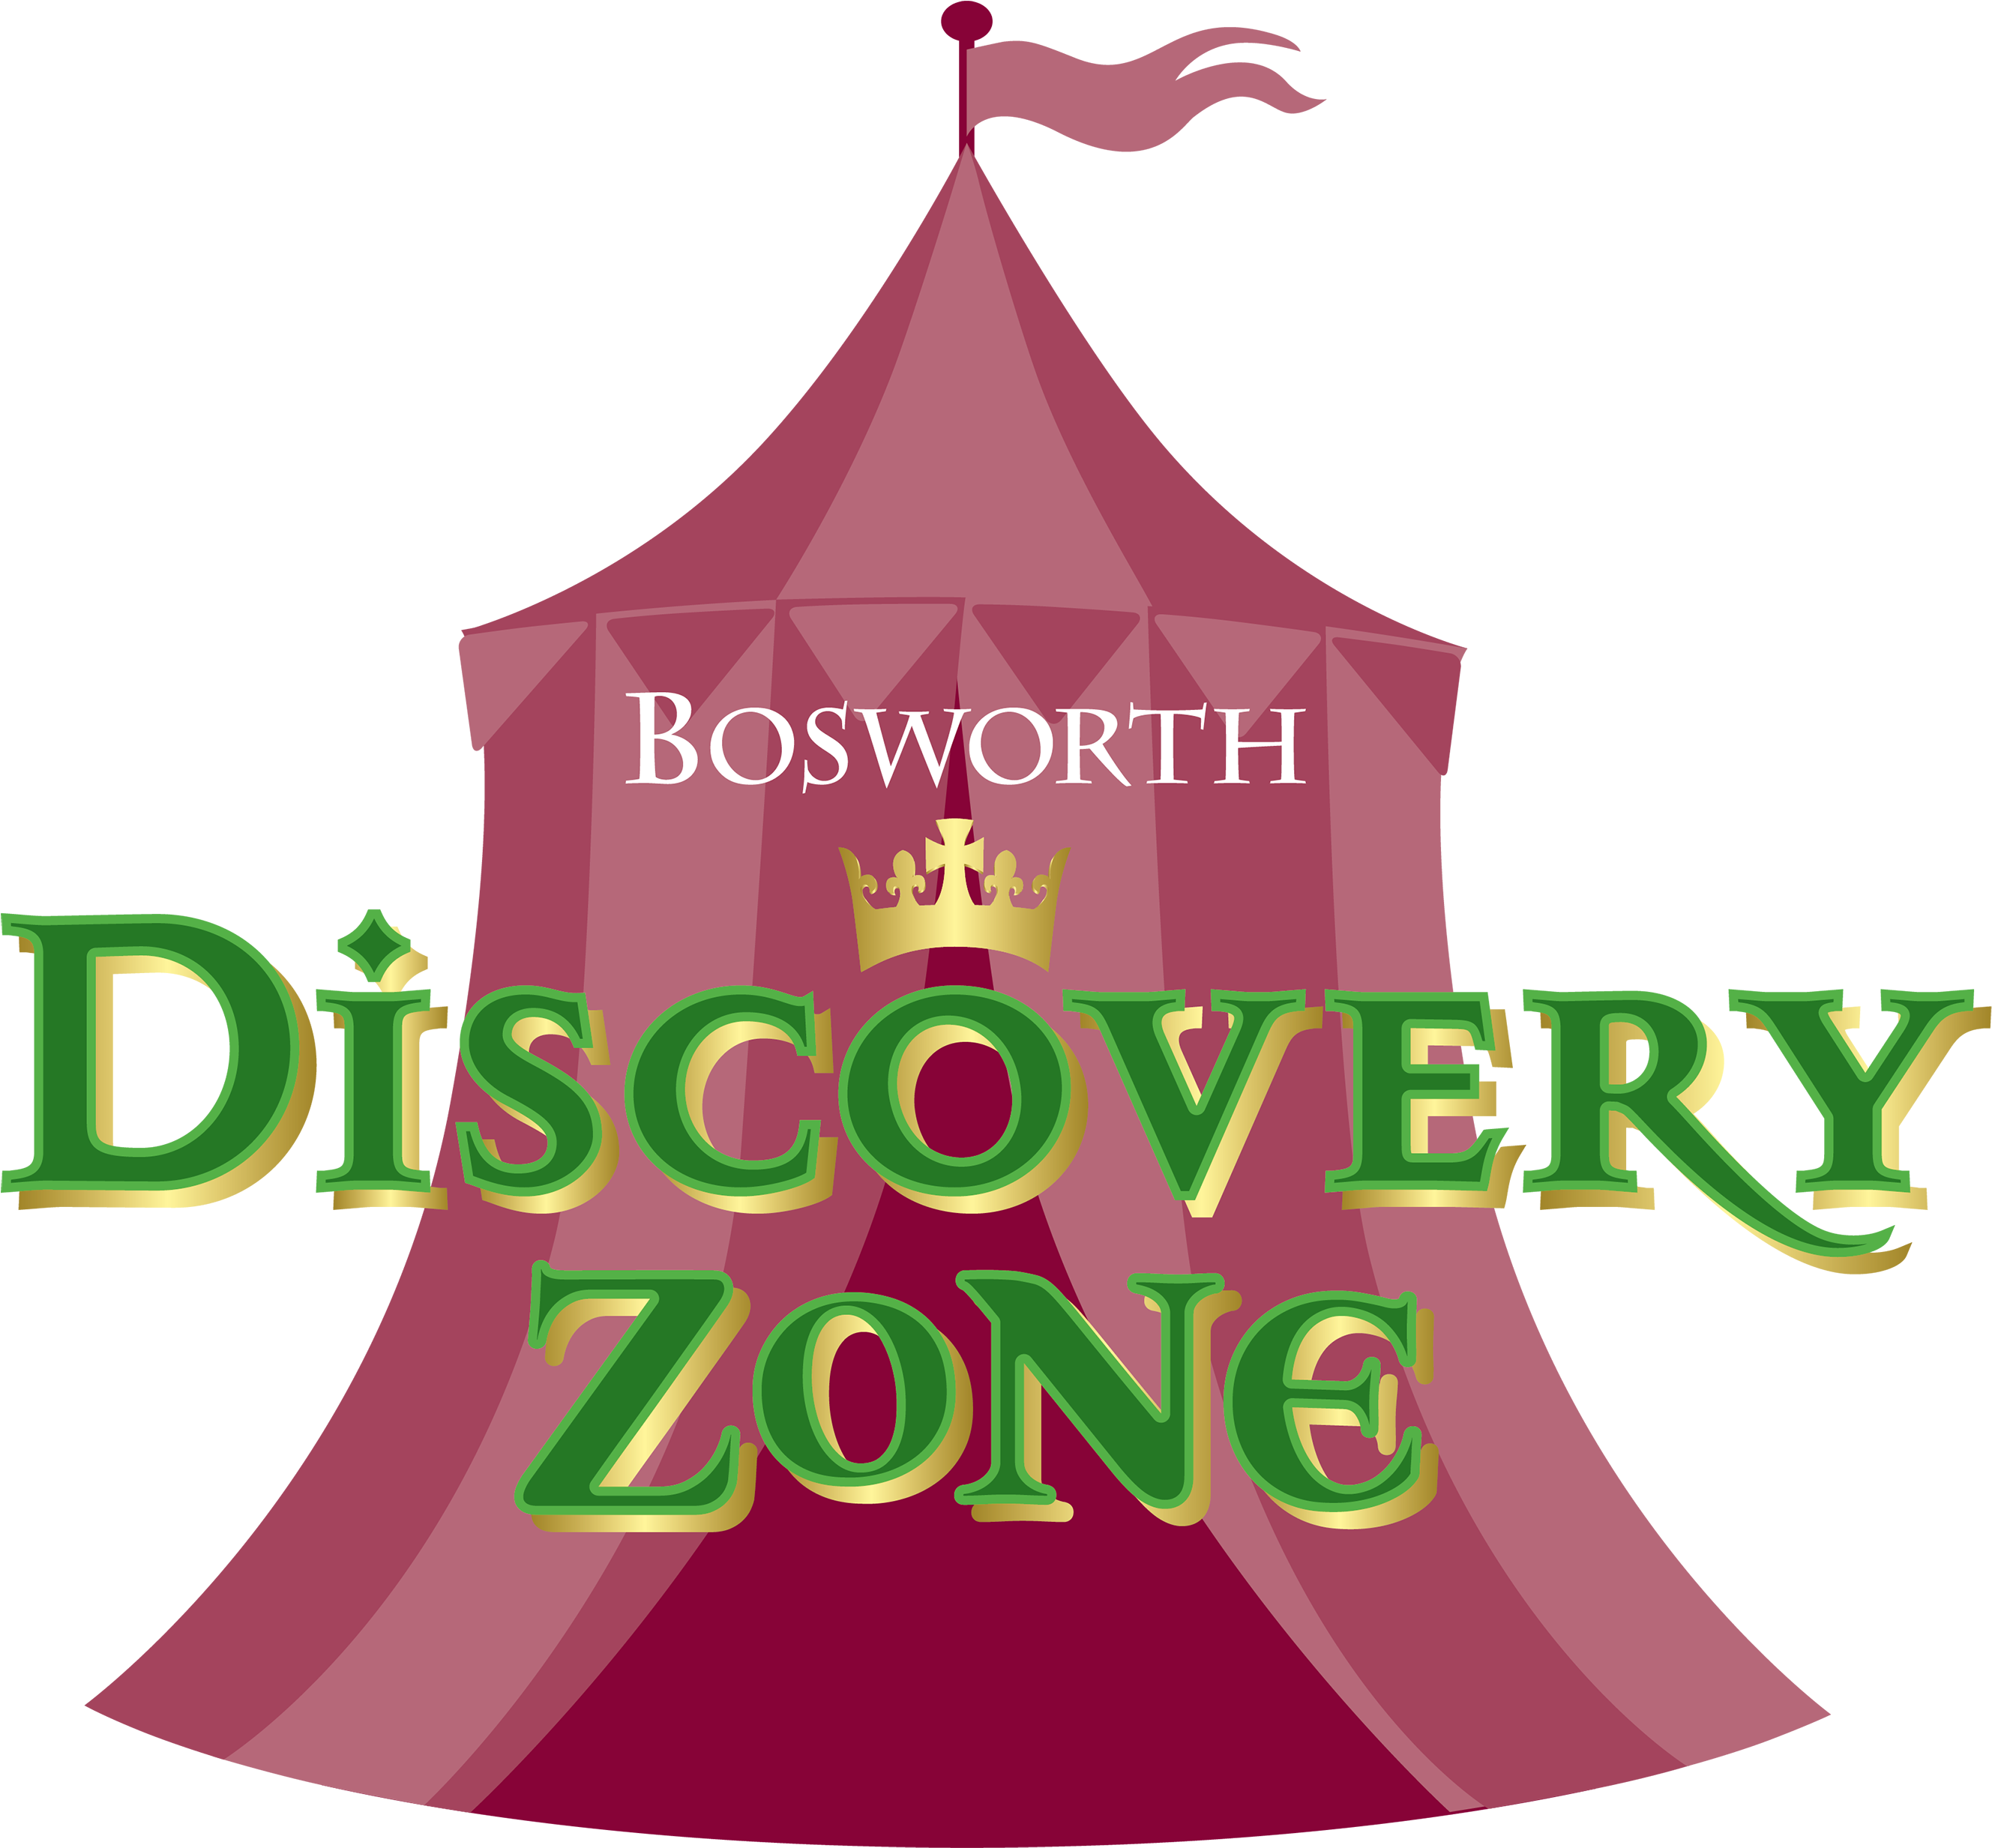 Bosworth Discovery Zone Open - Bosworth Discovery Zone Open (2953x2668)